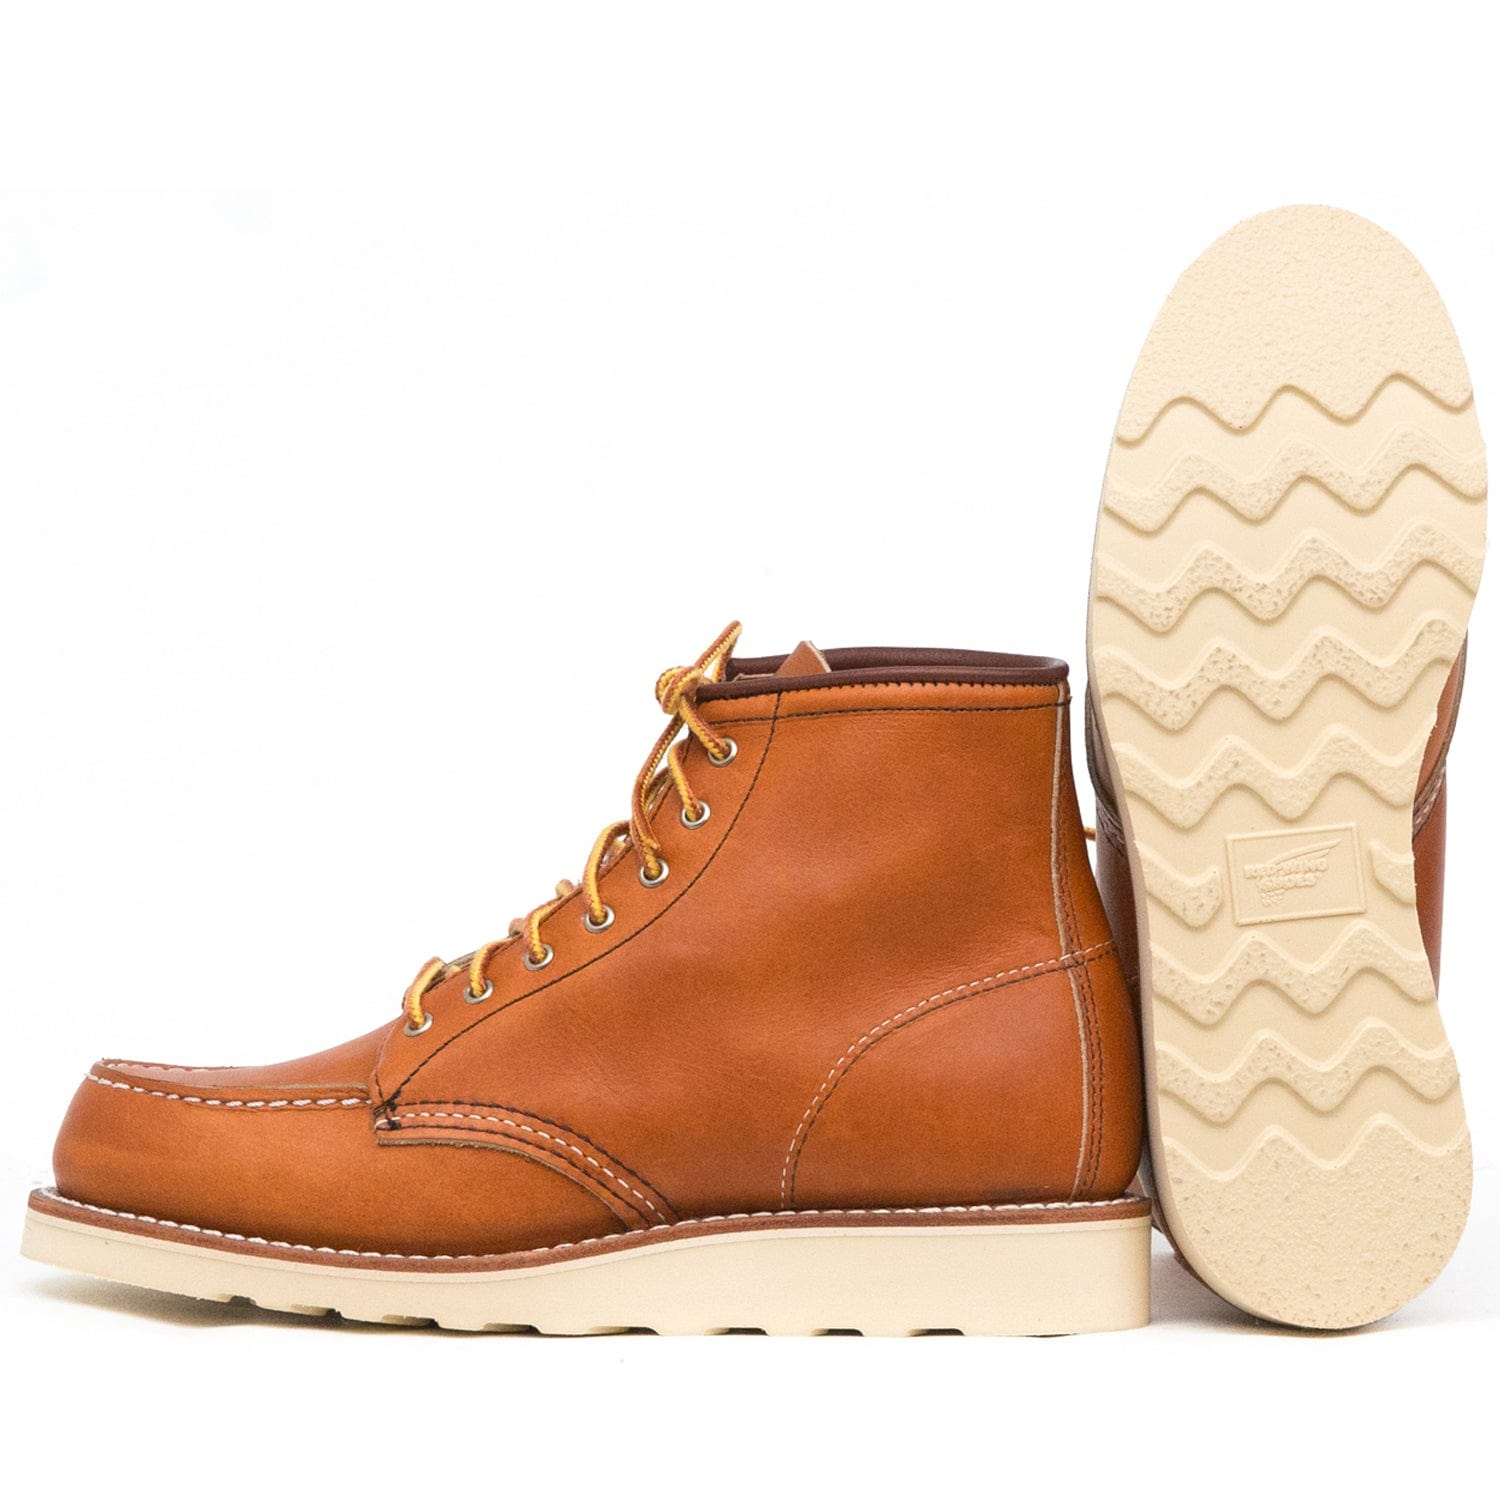 Women's Red Wing Moc Toe Boots 3375 - Tan Oro Legacy